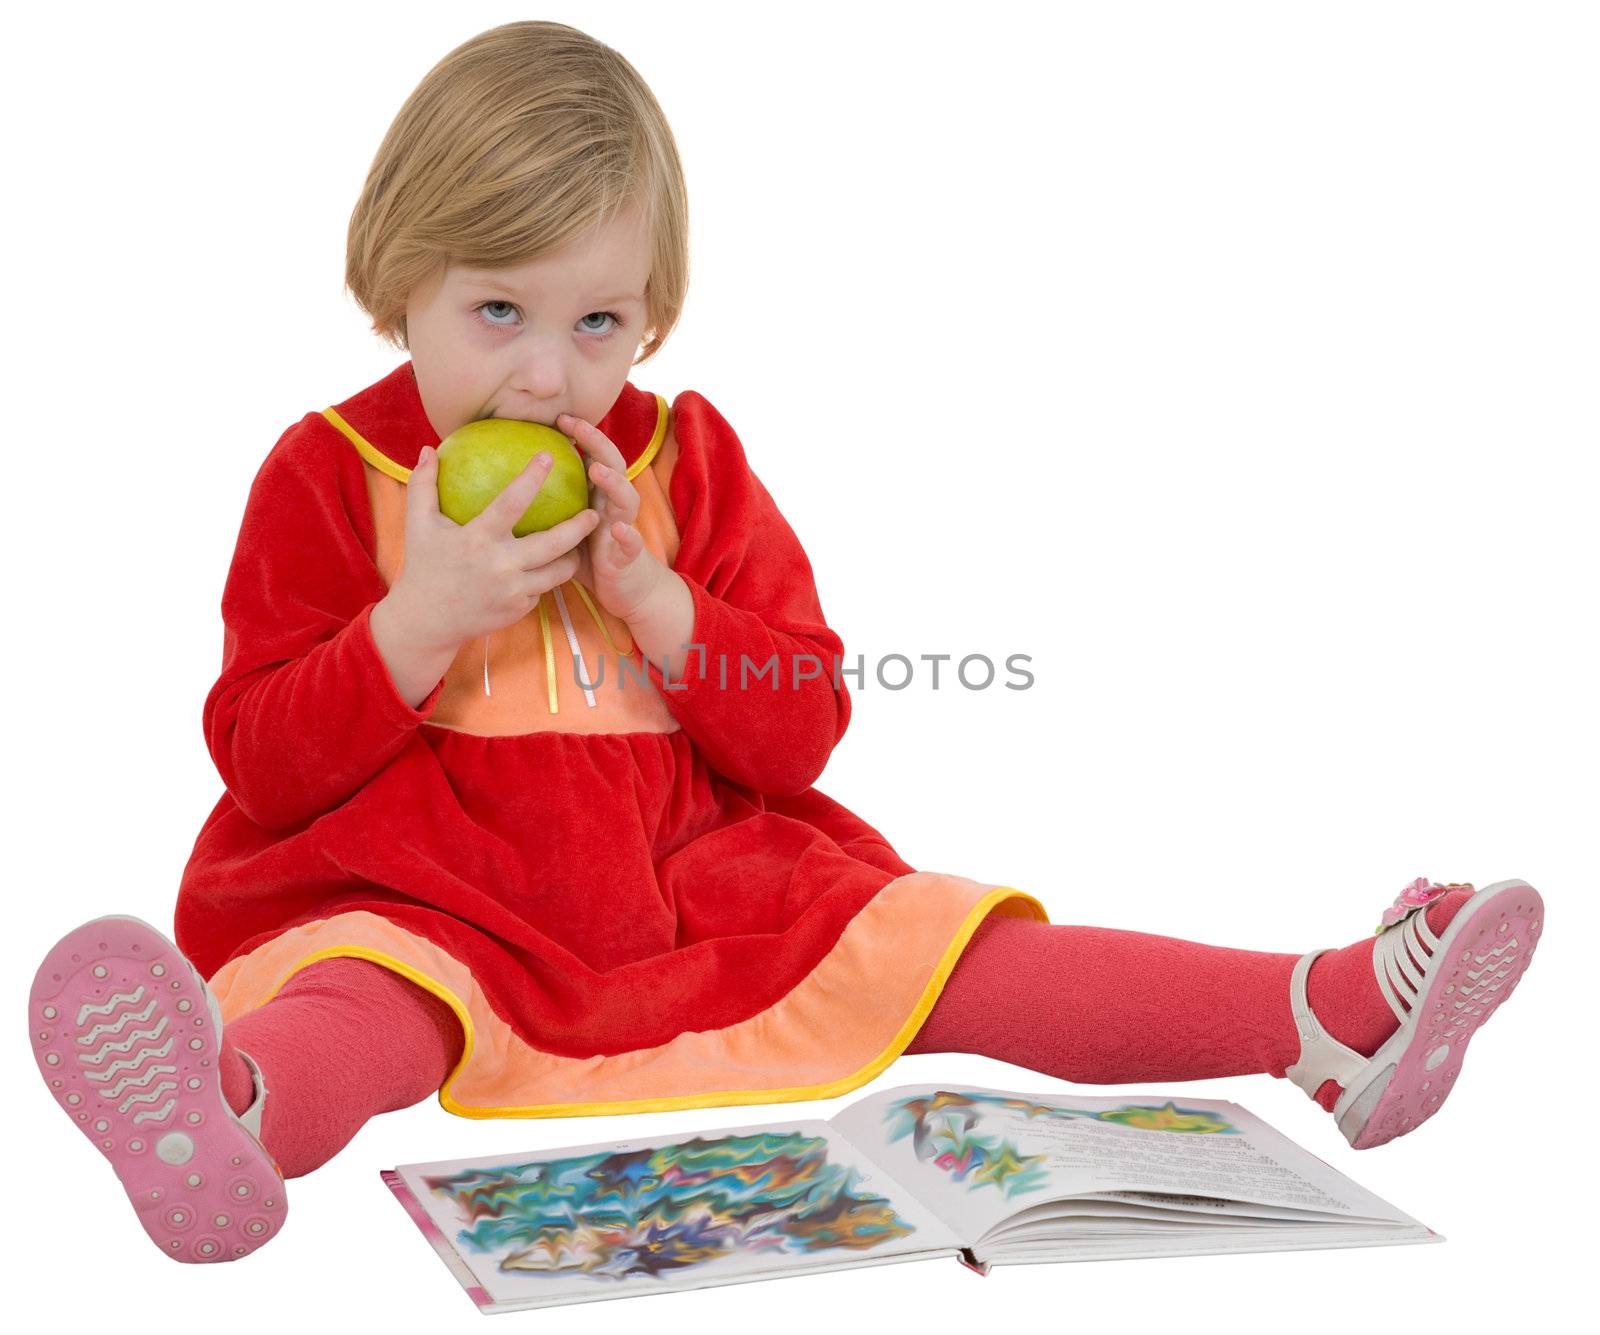 Little girl looking book and eating green apple